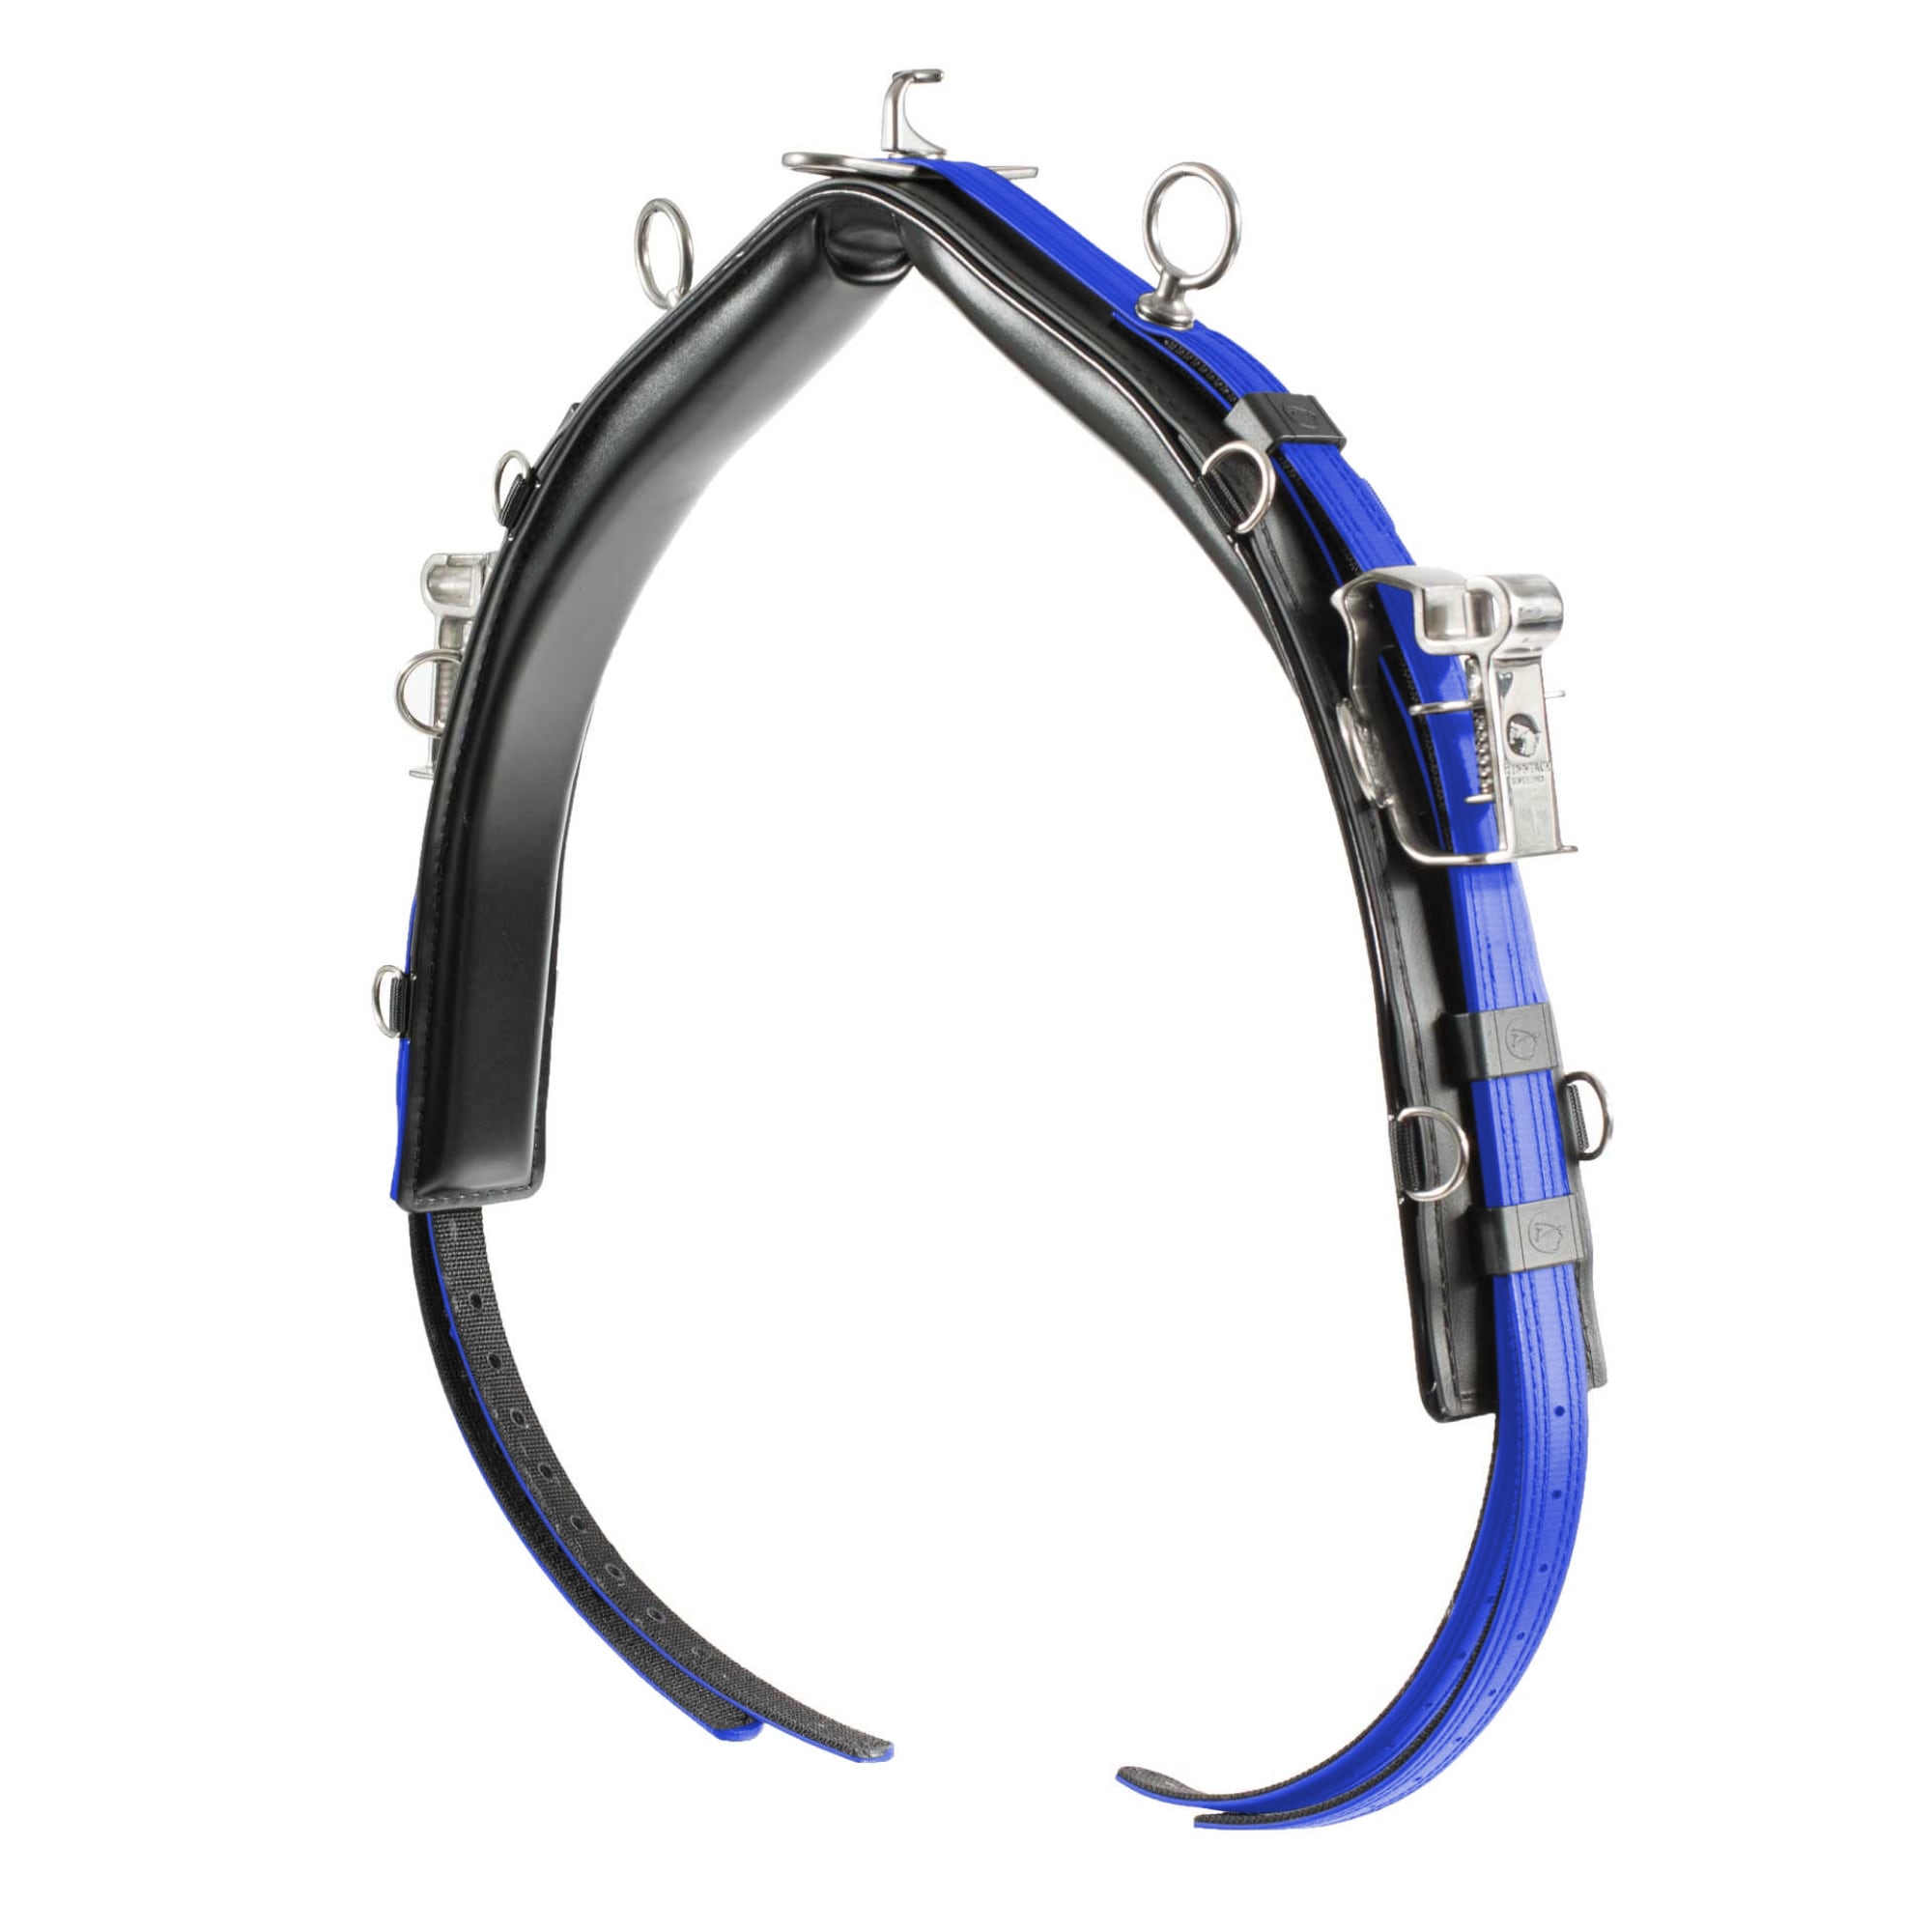 Finntack Pro QH Synthethic Harness Saddle